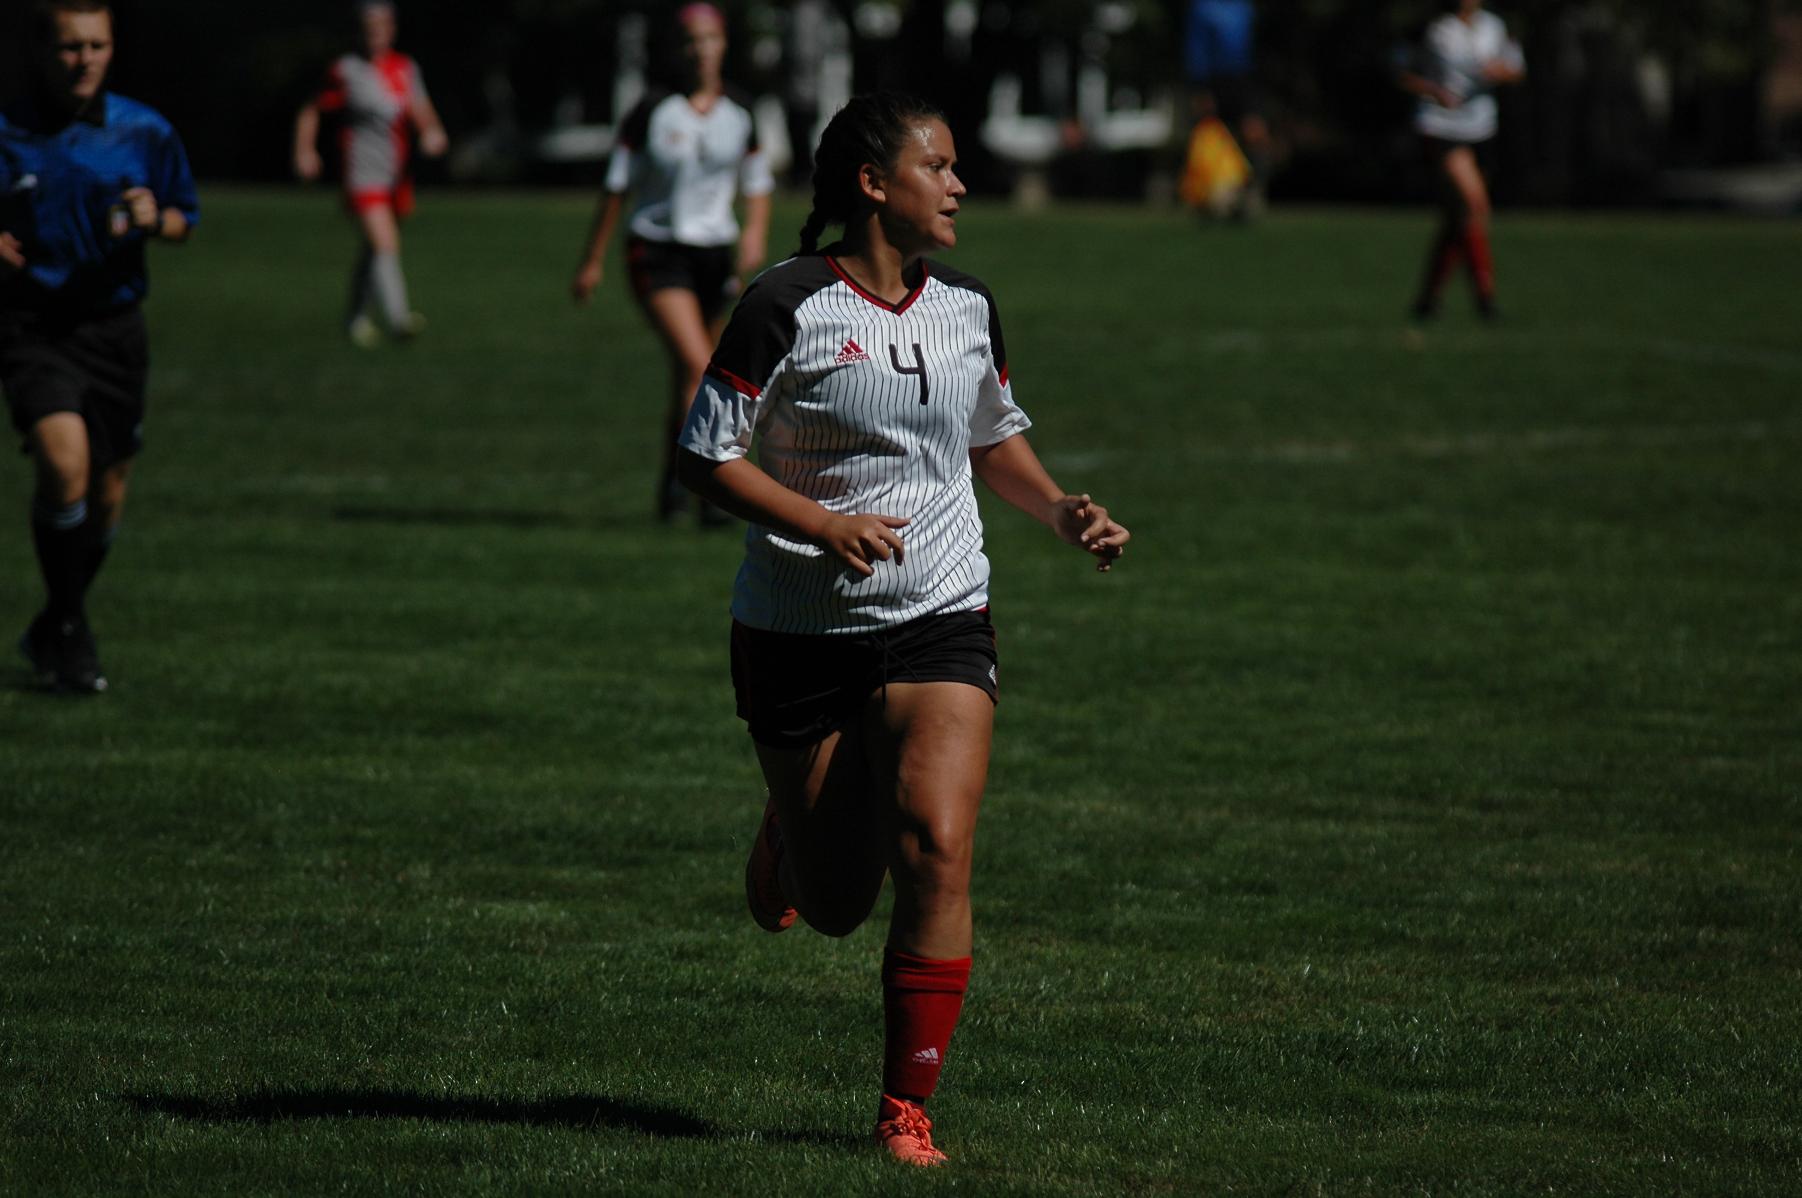 The women's soccer team fell 3-1 to Bentley University in their opening game of the 2018 season.